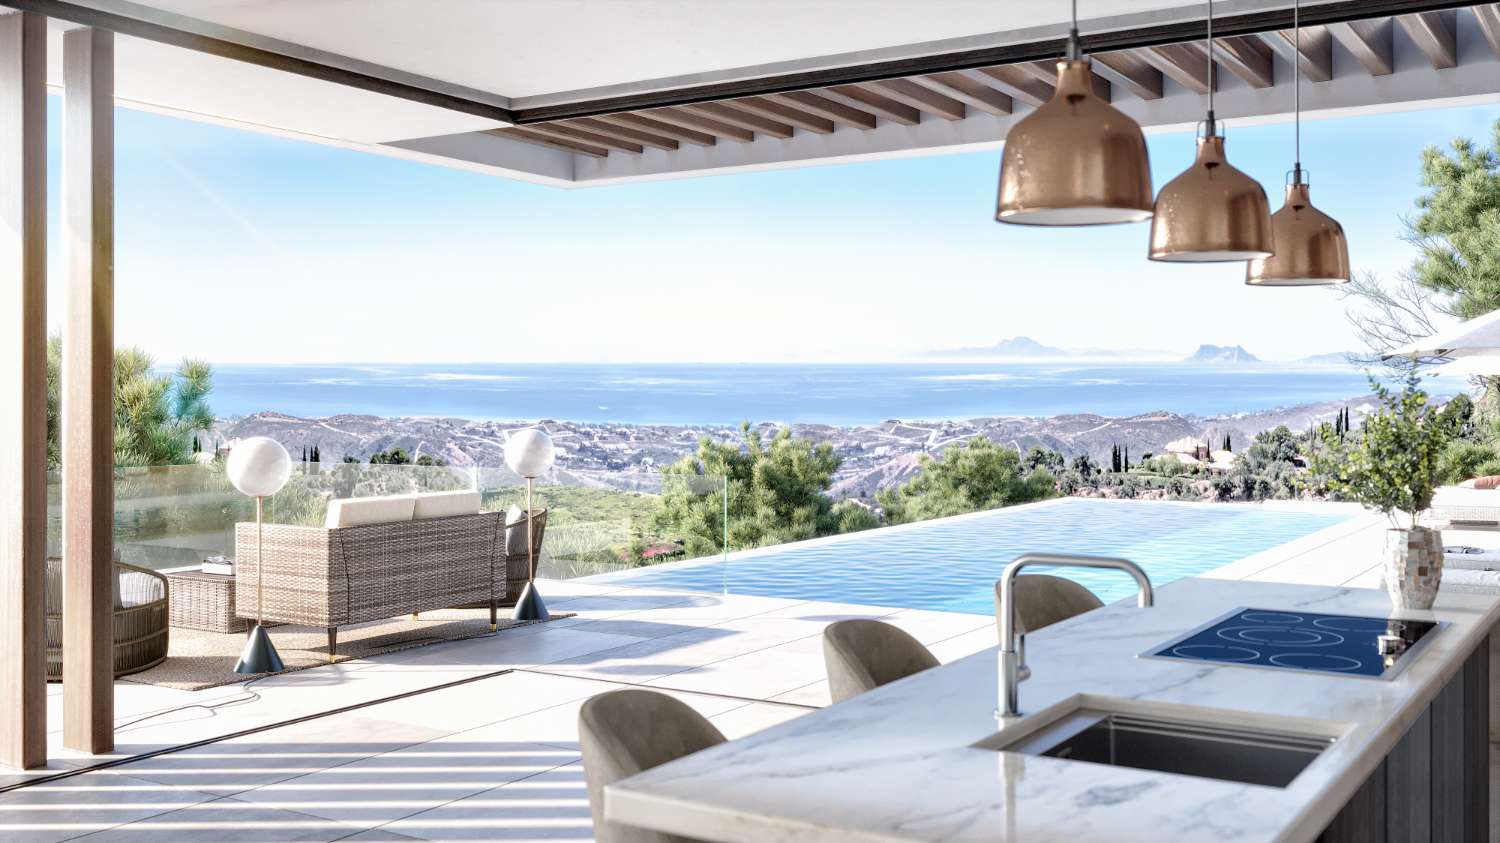 Unbeatable value for money, Single-family plot from 630.000€ with backdrop breathtaking views!